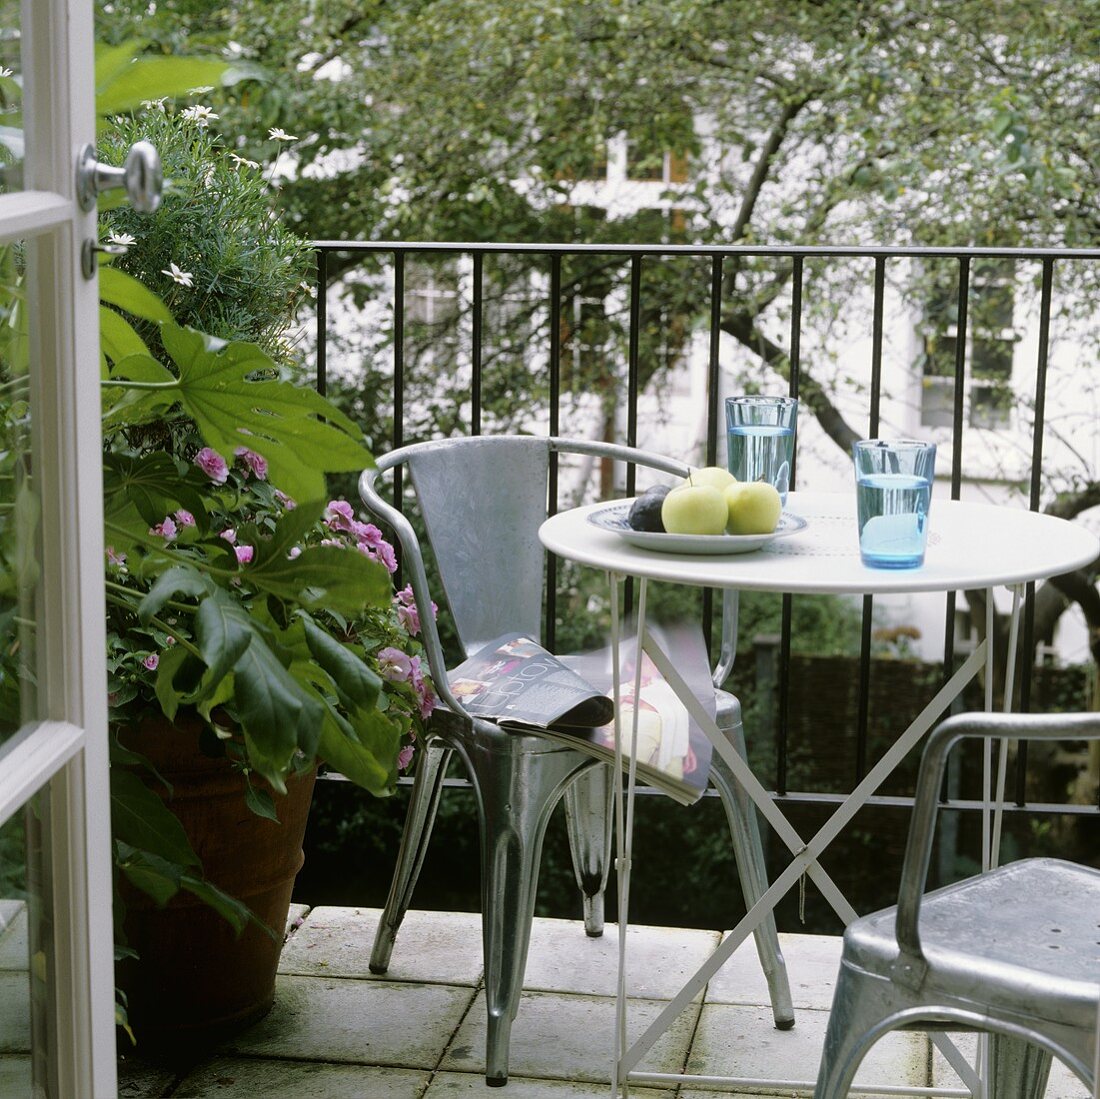 Metal chairs around a bistro table on a balcony with a garden view